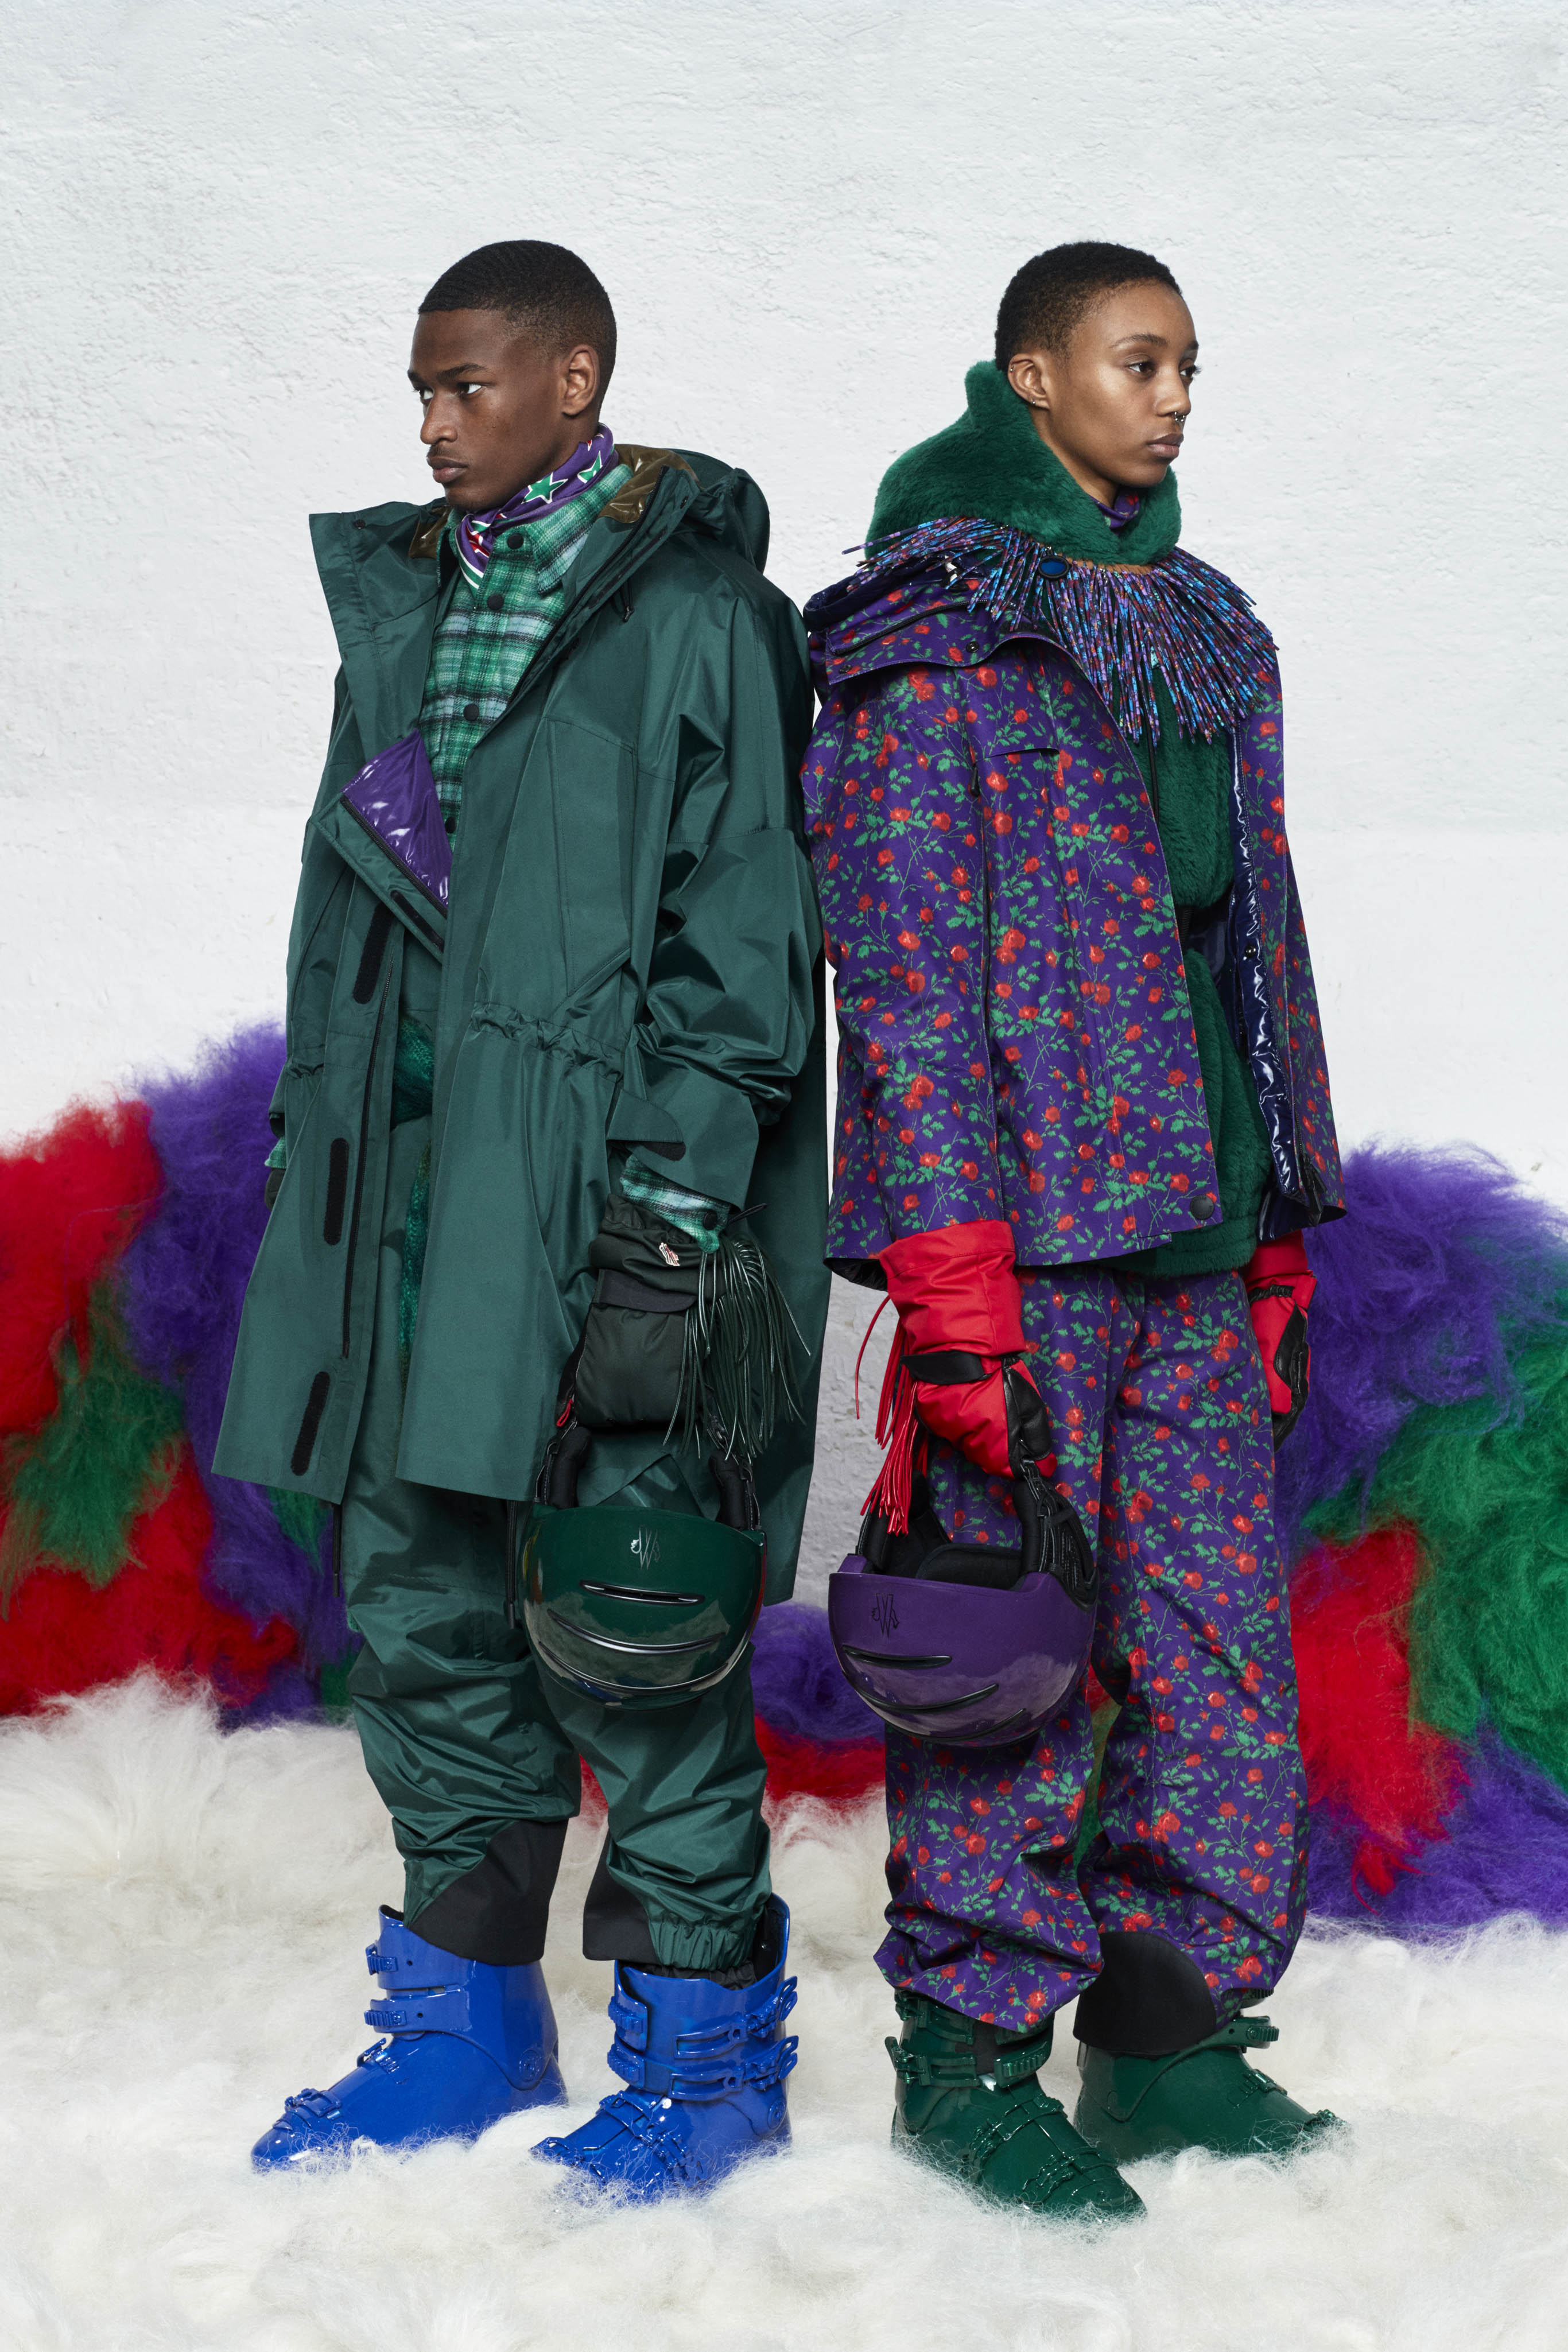 Mountain codes in the new Moncler Grenoble collection